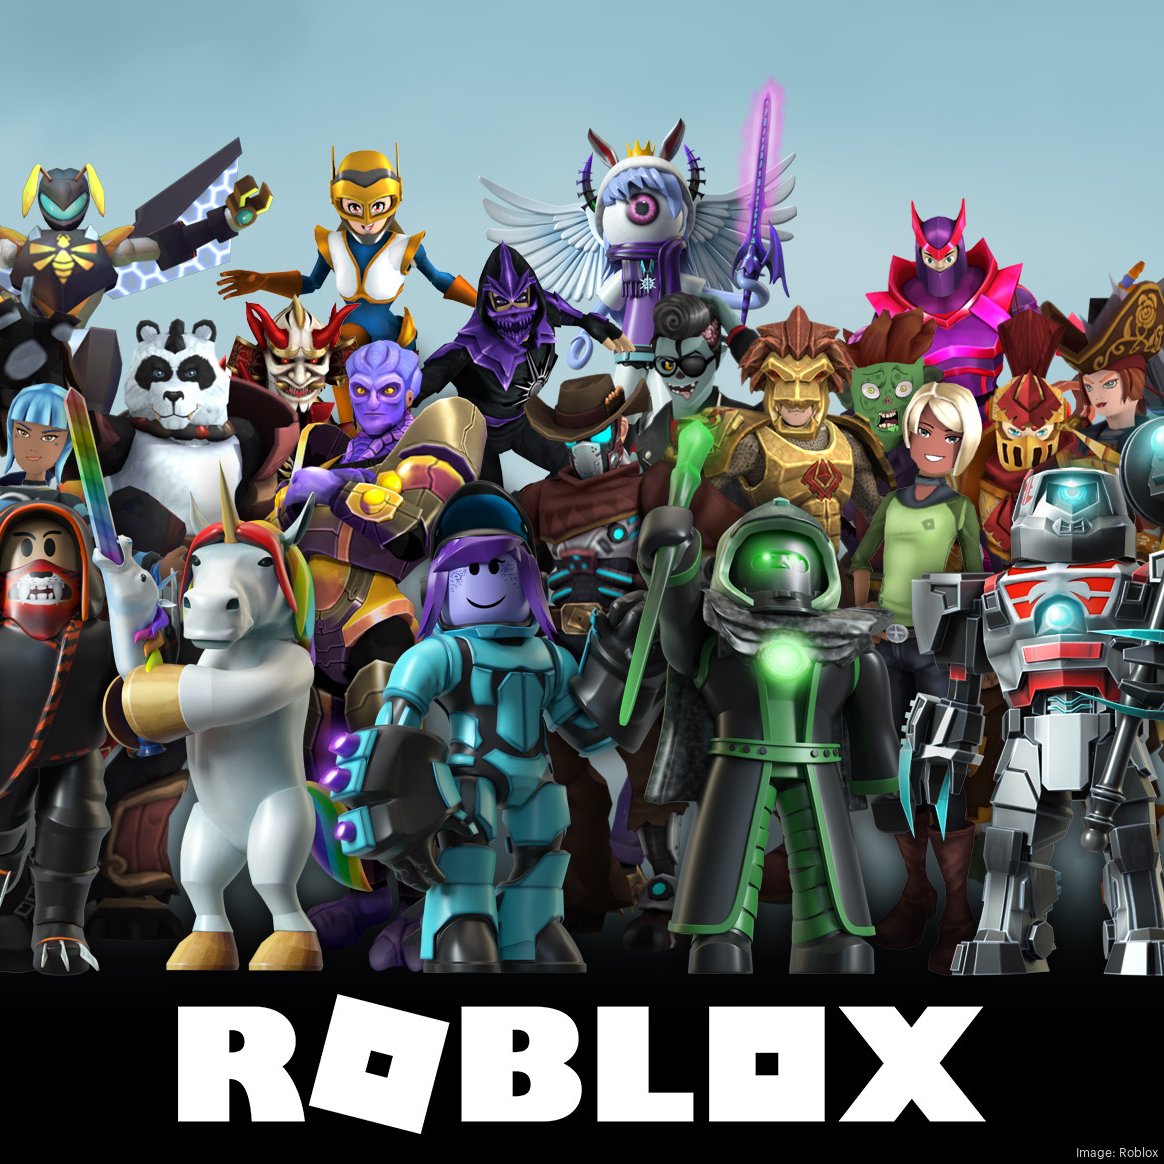 Gaming site Roblox valued at $30 billion, plans direct listing